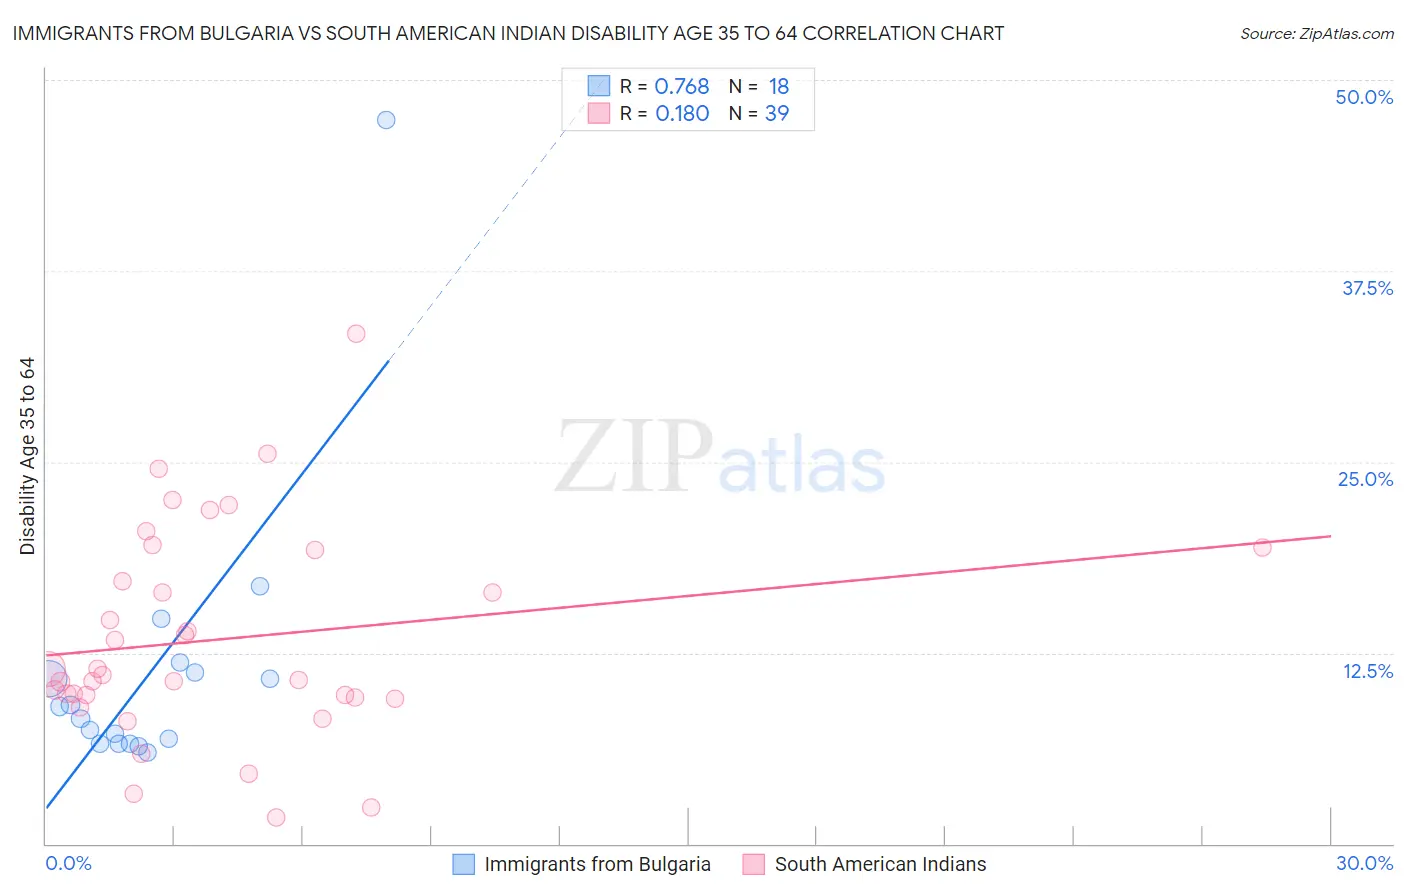 Immigrants from Bulgaria vs South American Indian Disability Age 35 to 64